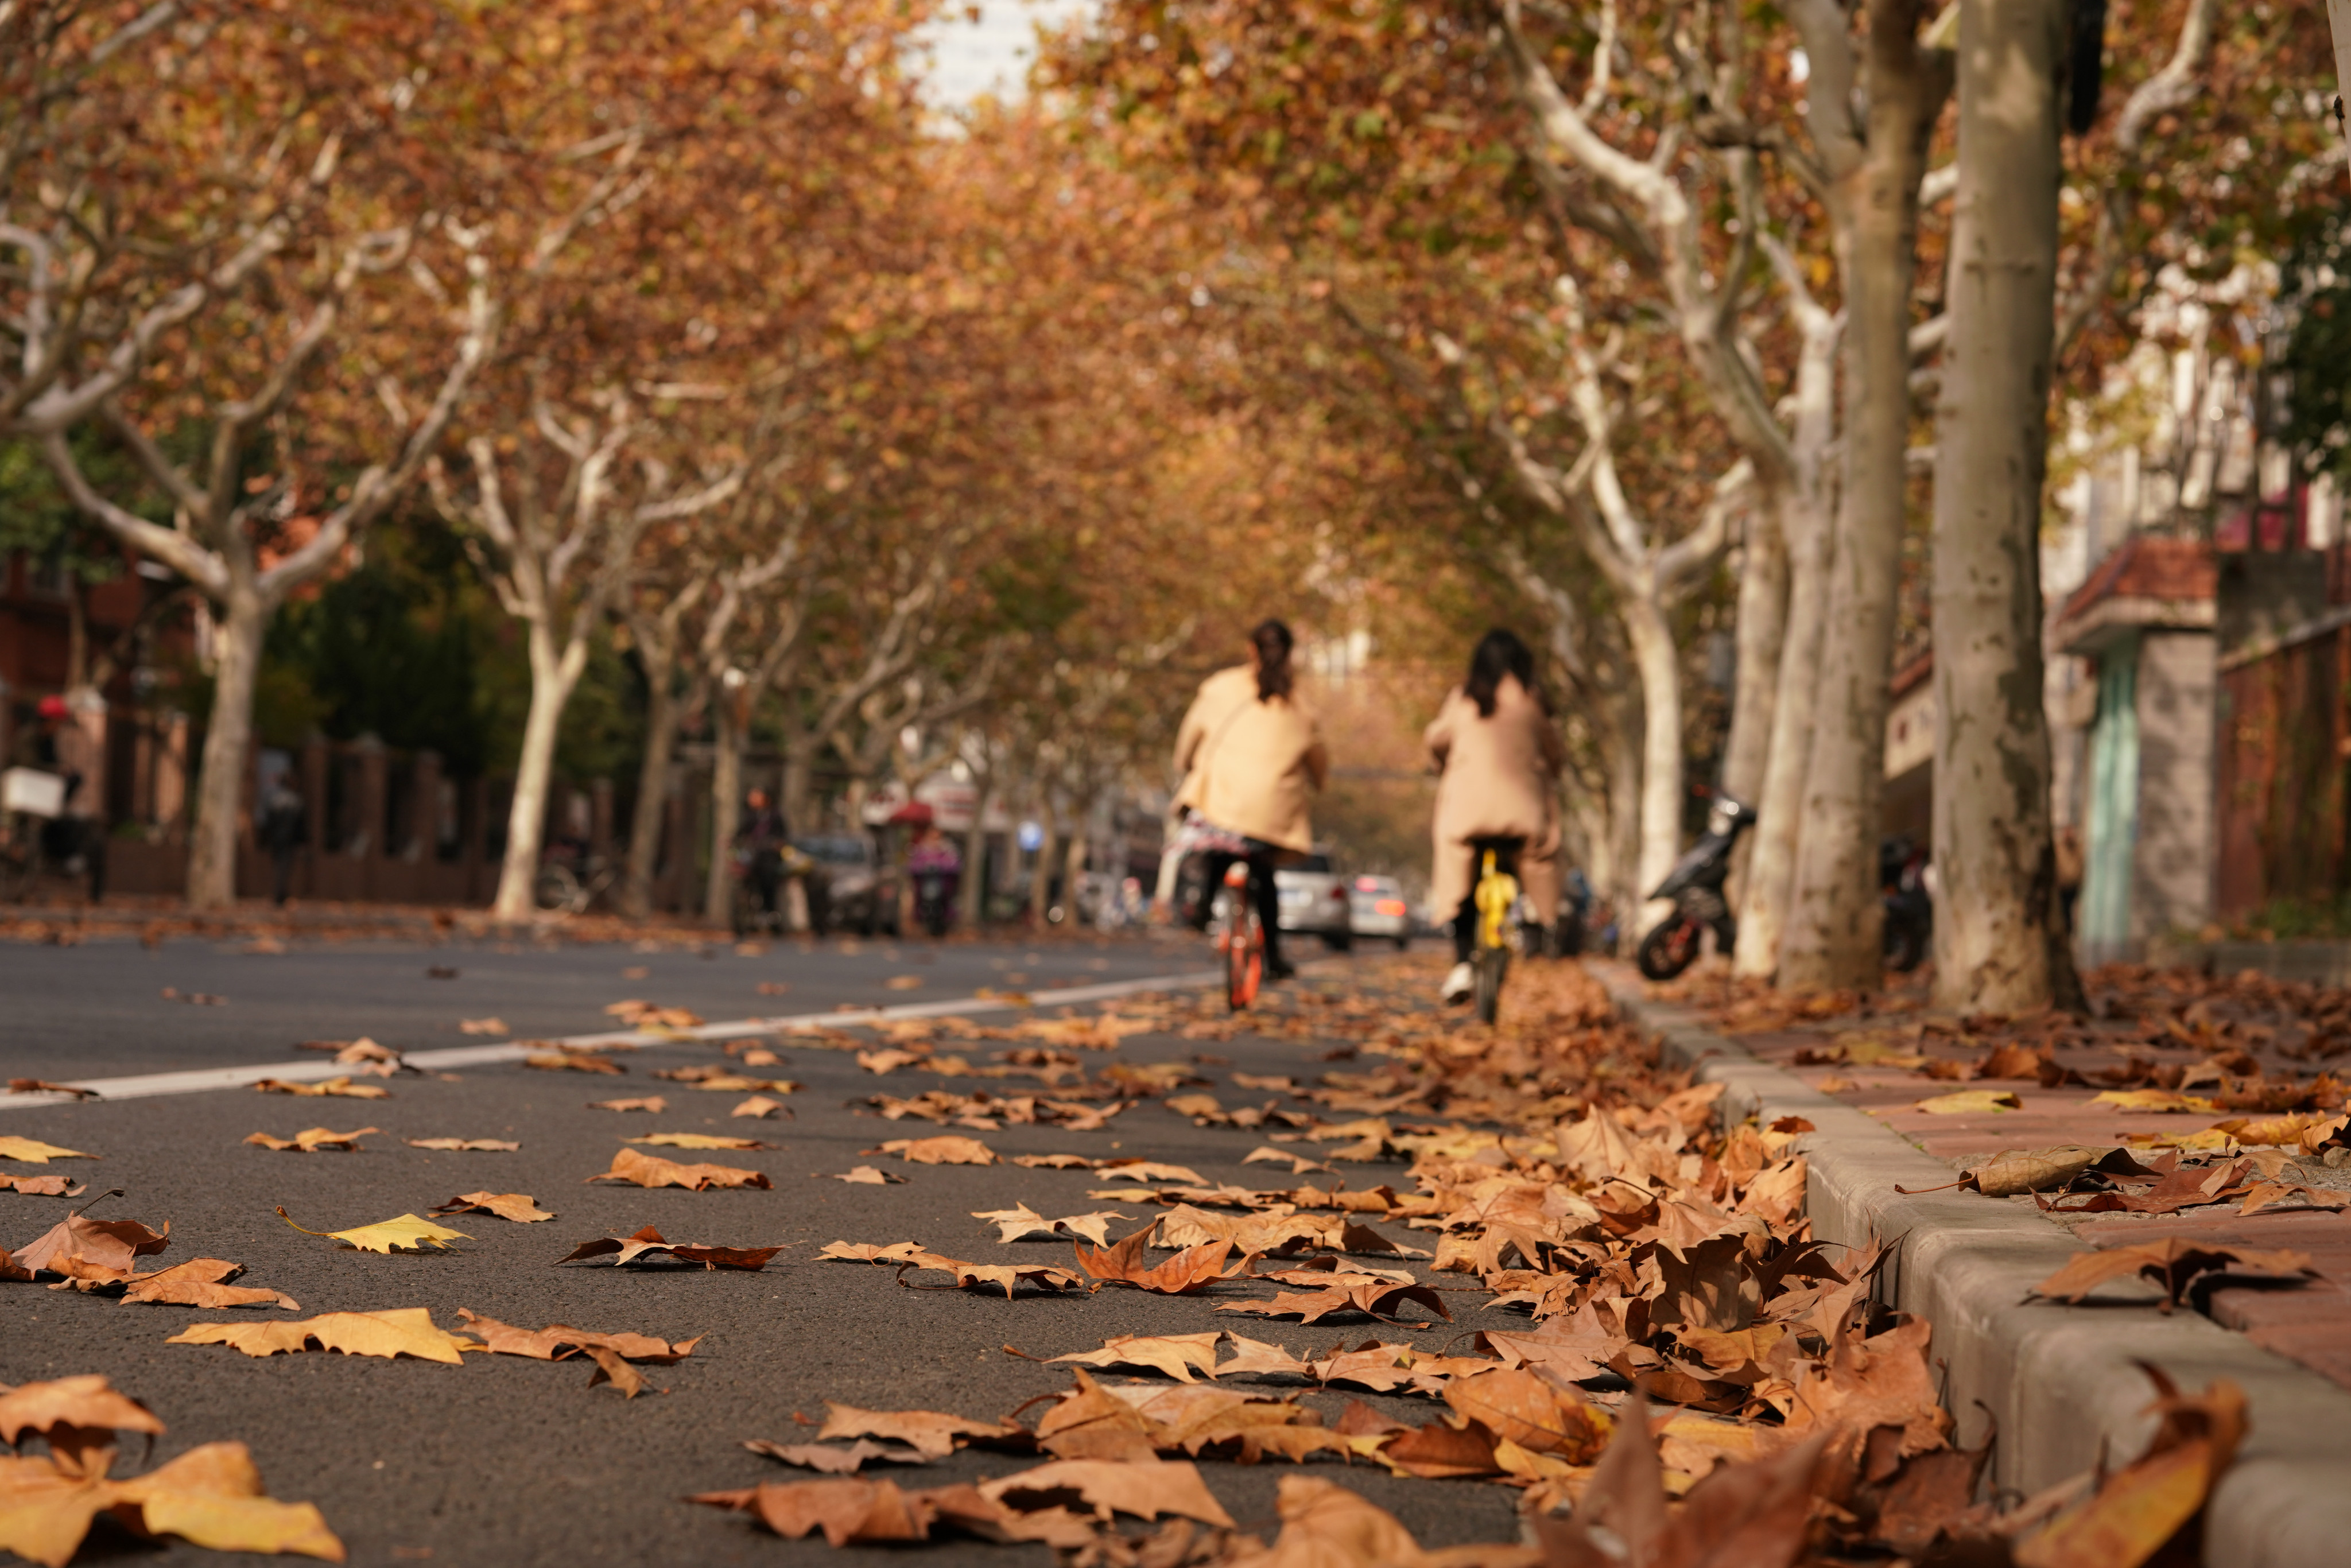 Fallen leaves have become an iconic autumnal attraction in Shanghai. Shutterstock